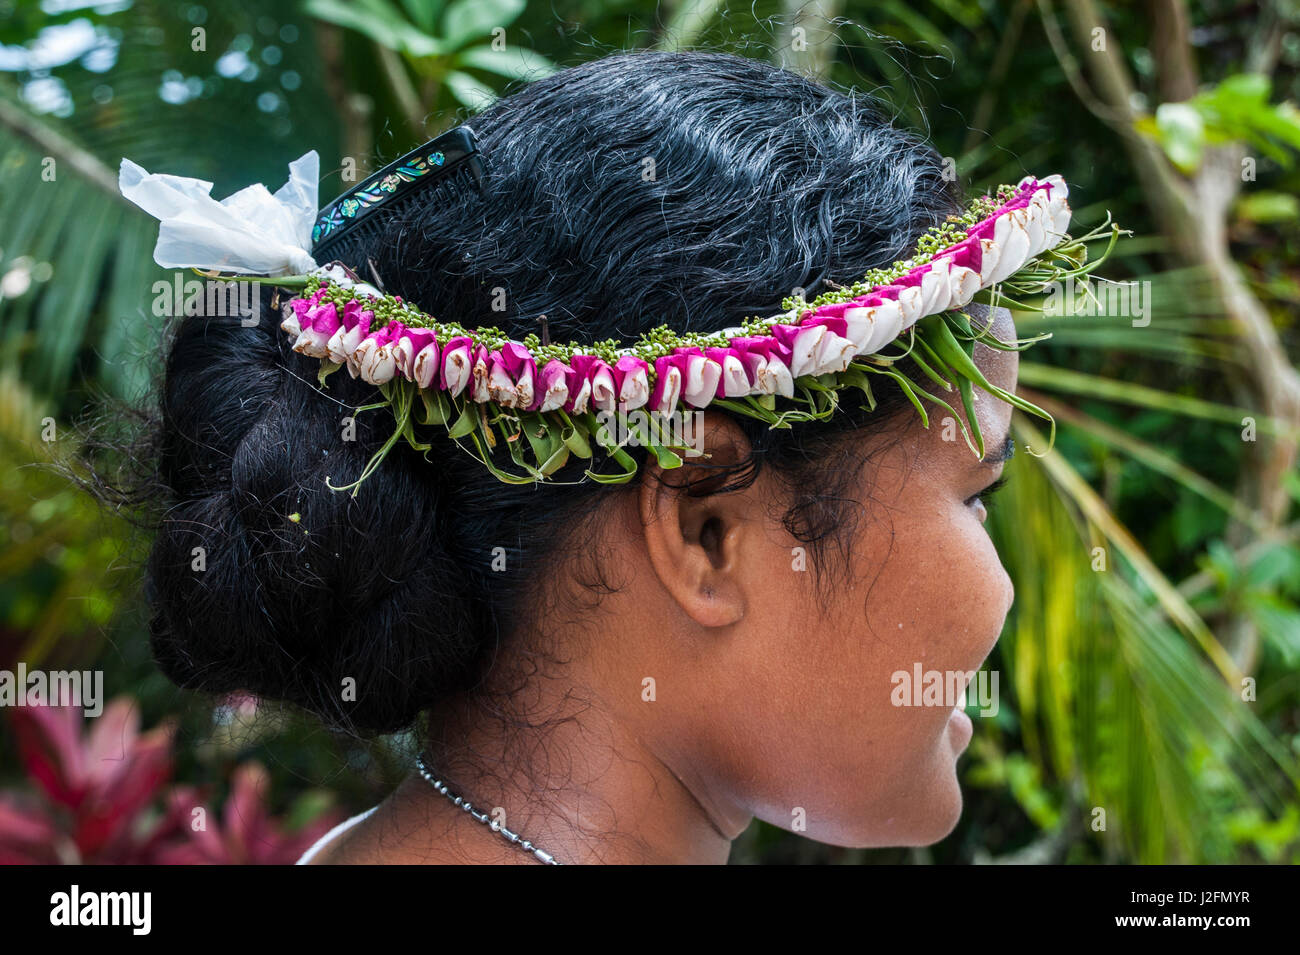 Young girl with flowers in her hair, Island of Yap, Micronesia Stock Photo